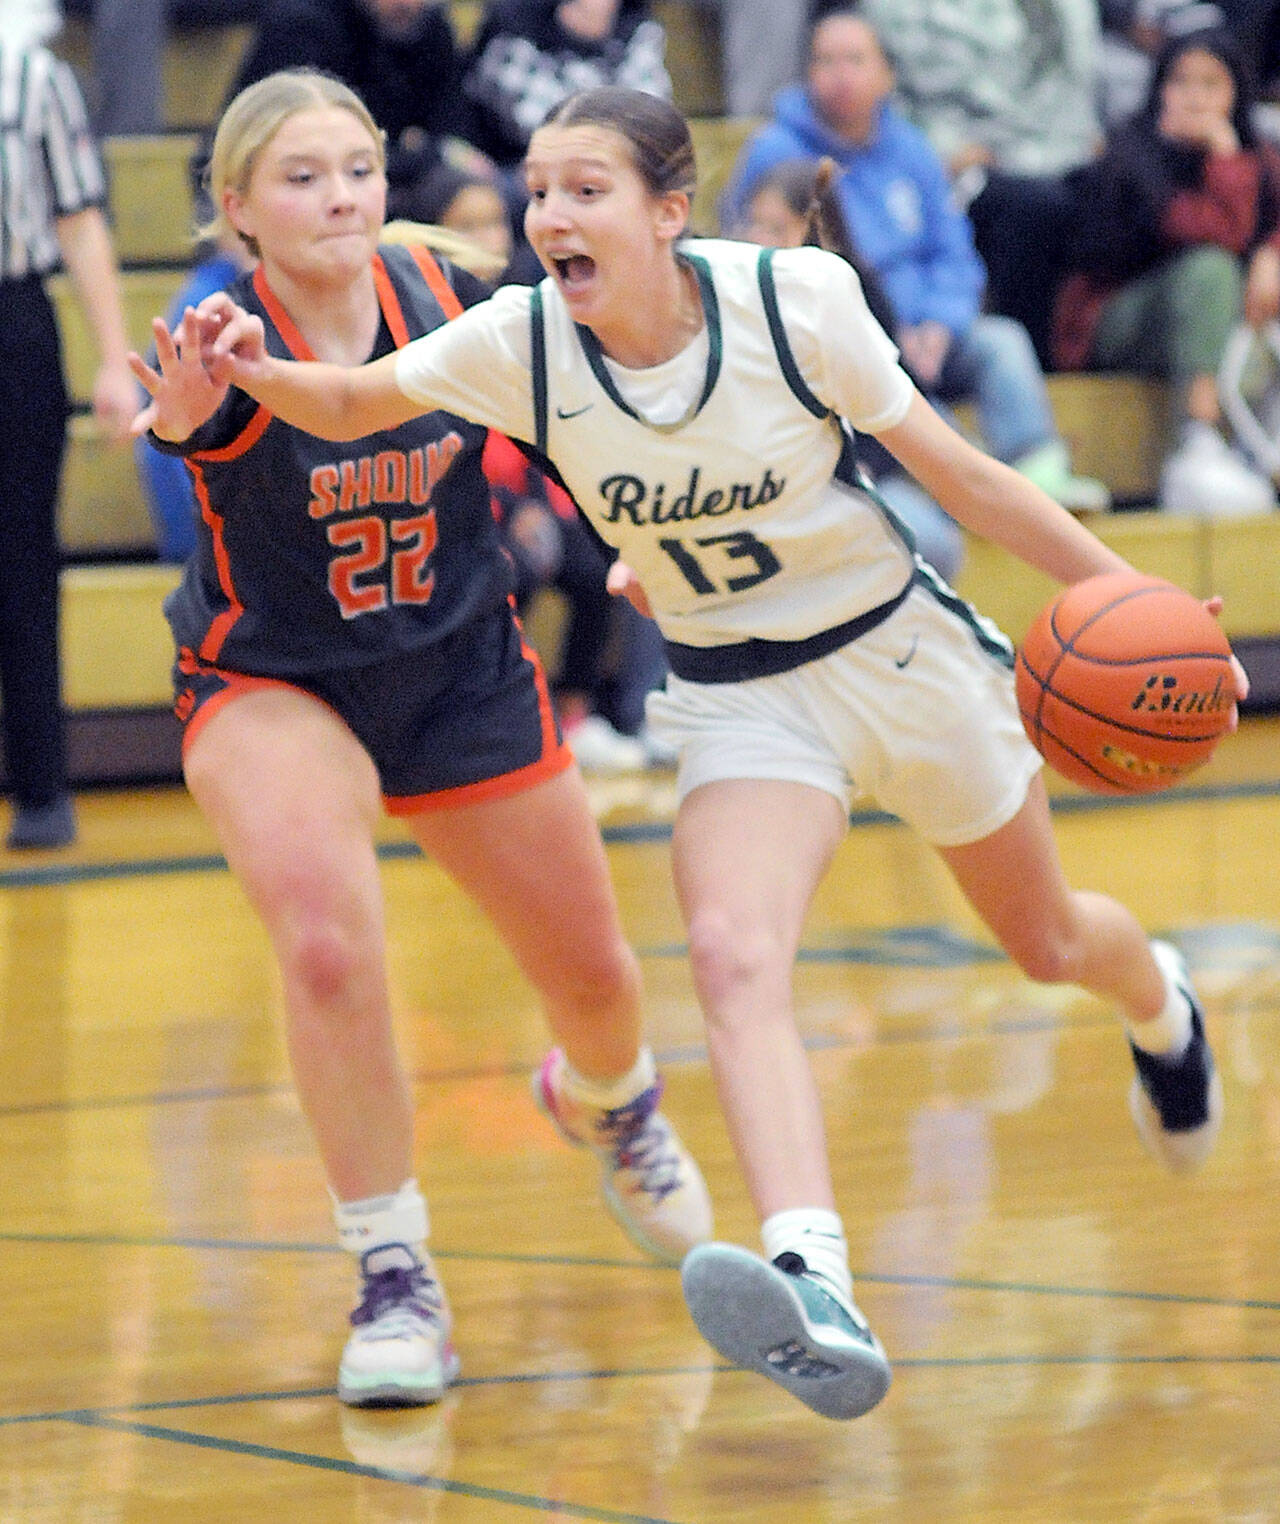 KEITH THORPE/PENINSULA DAILY NEWS Port Angeles’ Morgan Politika, right, charges to the key defended by Washougal’s Ireland Albaugh on Thursday at Port Angeles High School.